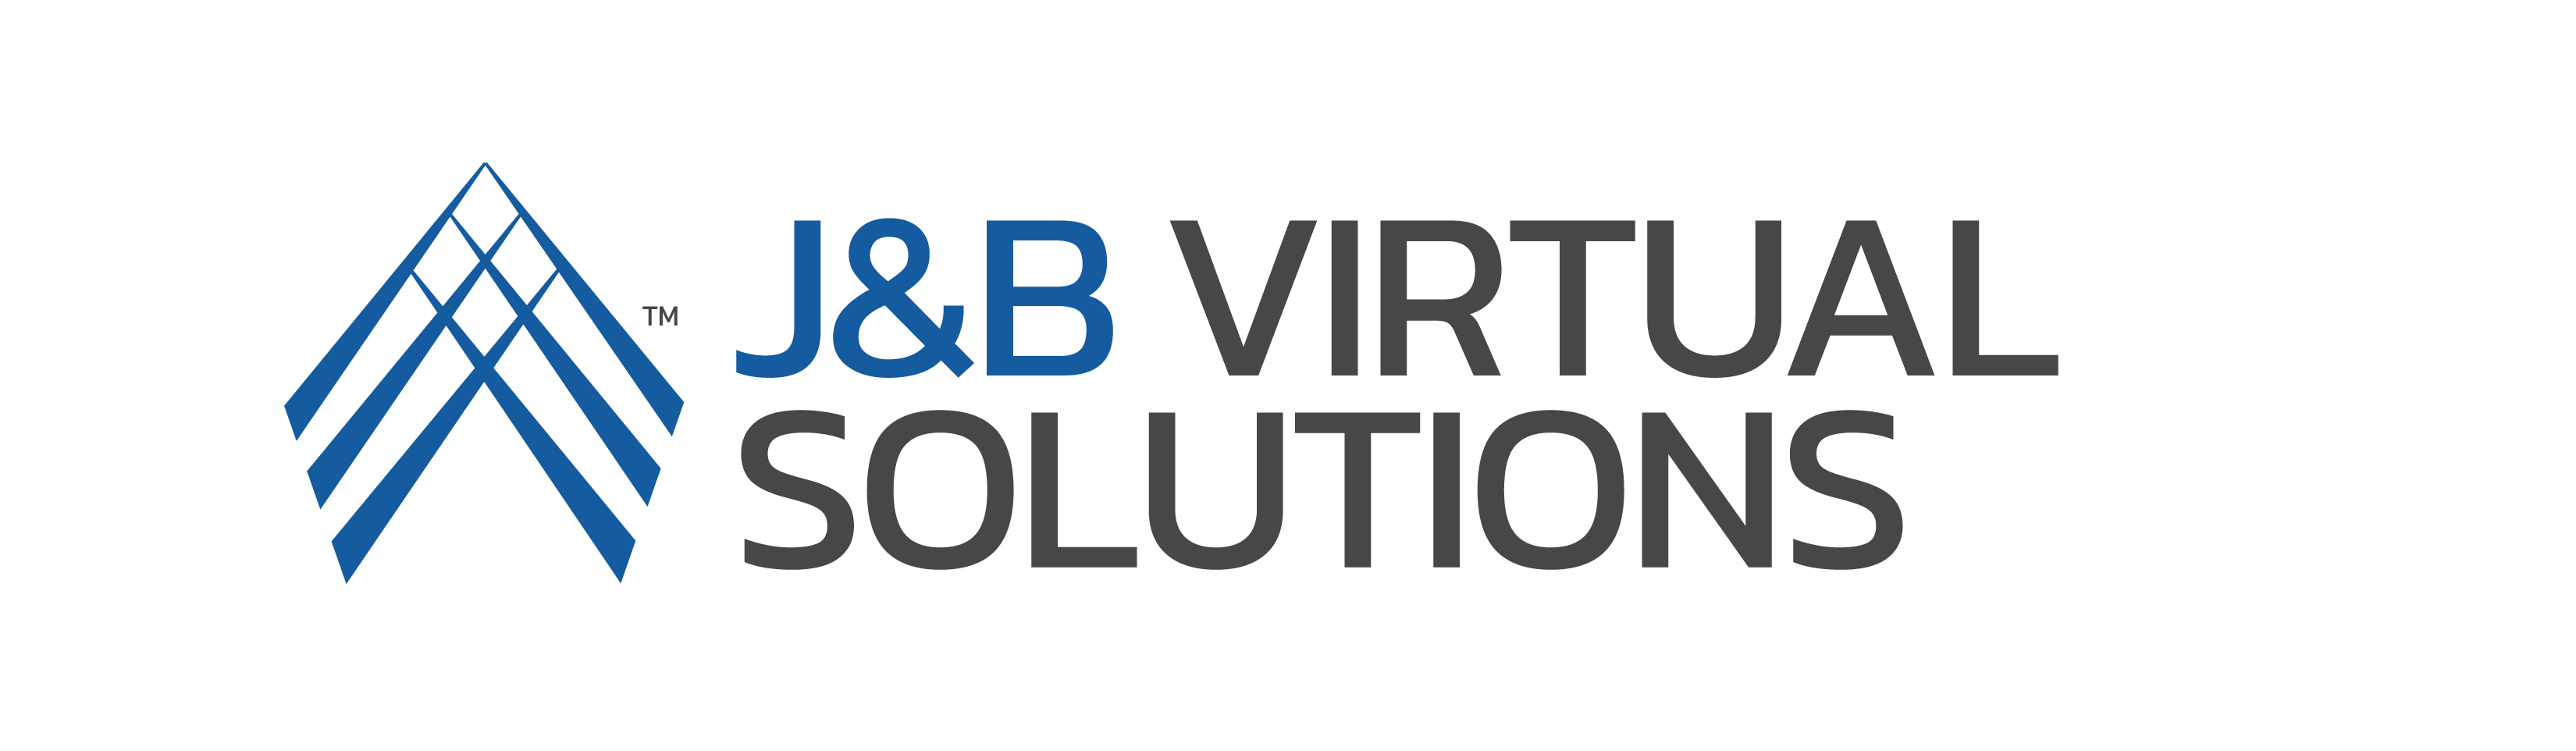 JB Virtual Solutions Stacked FC